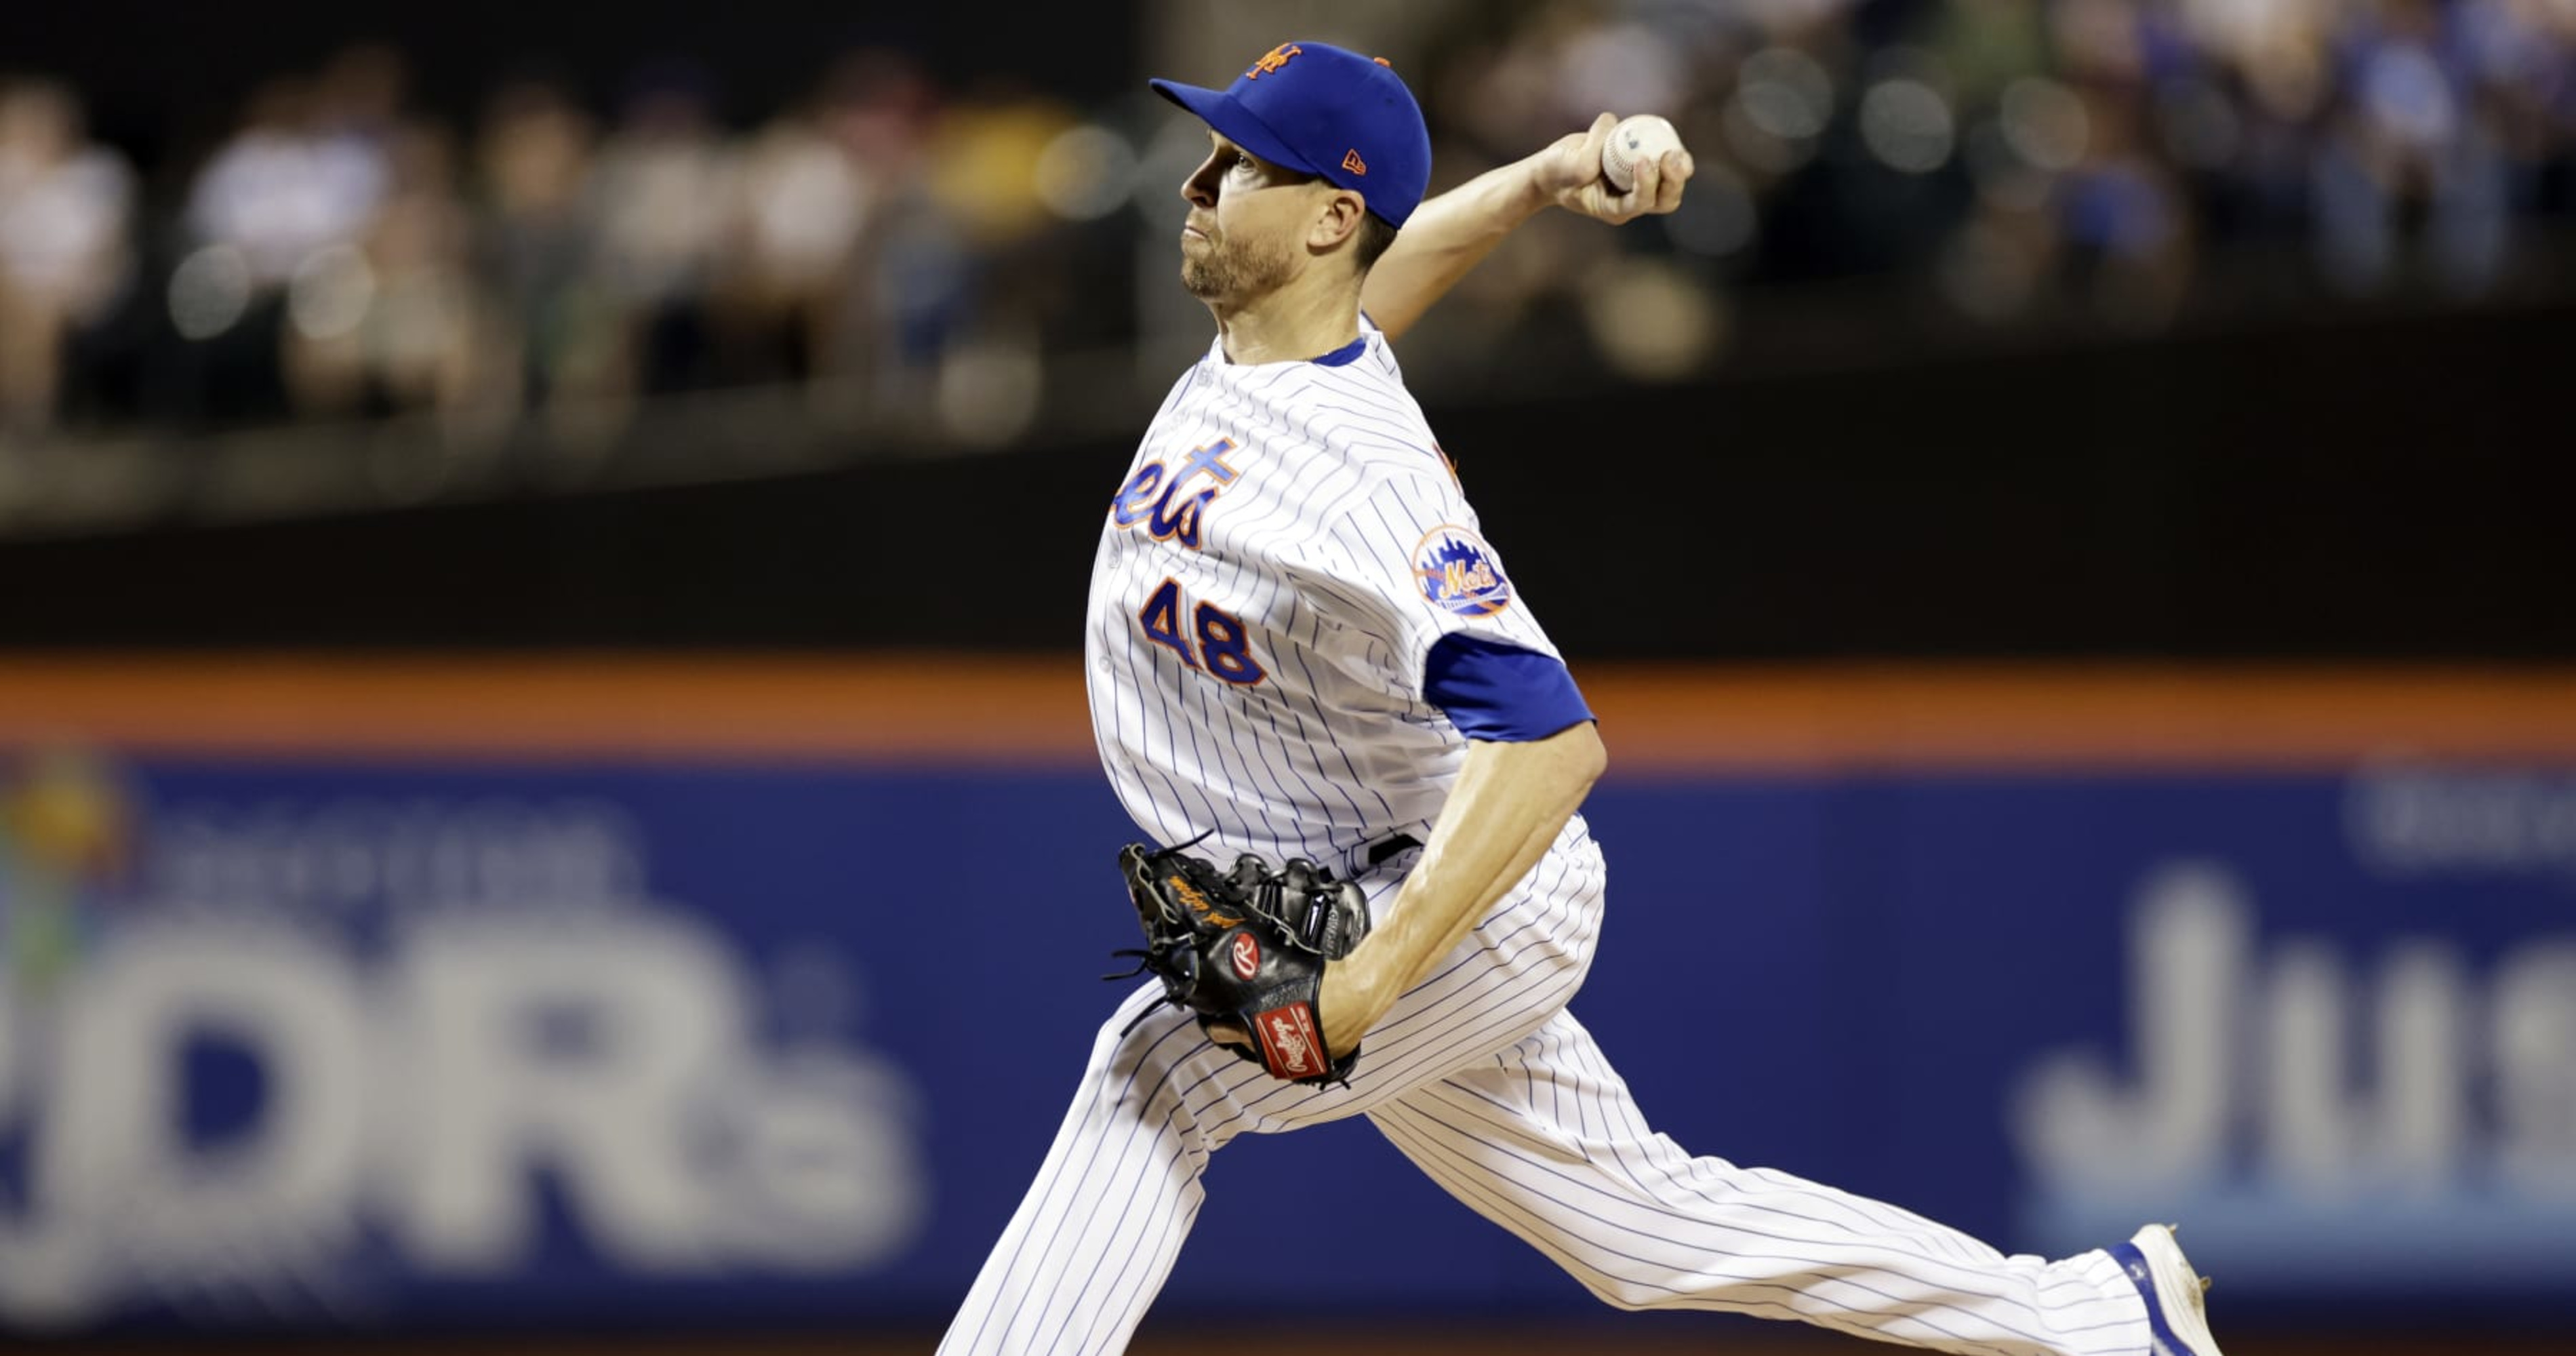 Jacob deGrom Rumors: Rangers May Pursue Mets Star If He Tests Free Agency